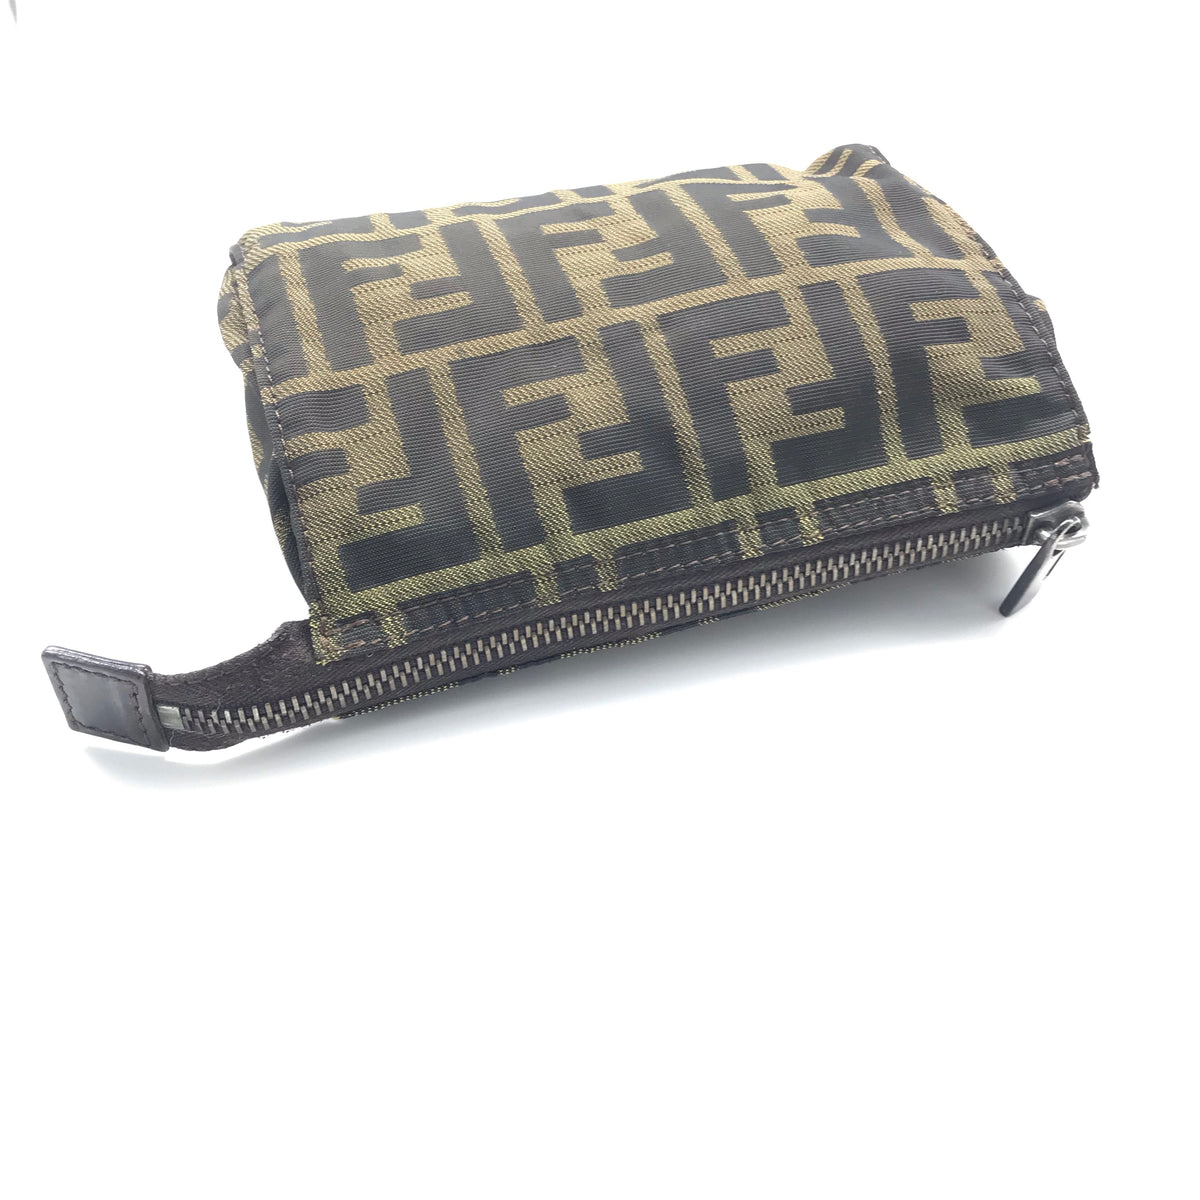 SOLD OUT —— FENDI zucca mini pouch On website search for AO29272